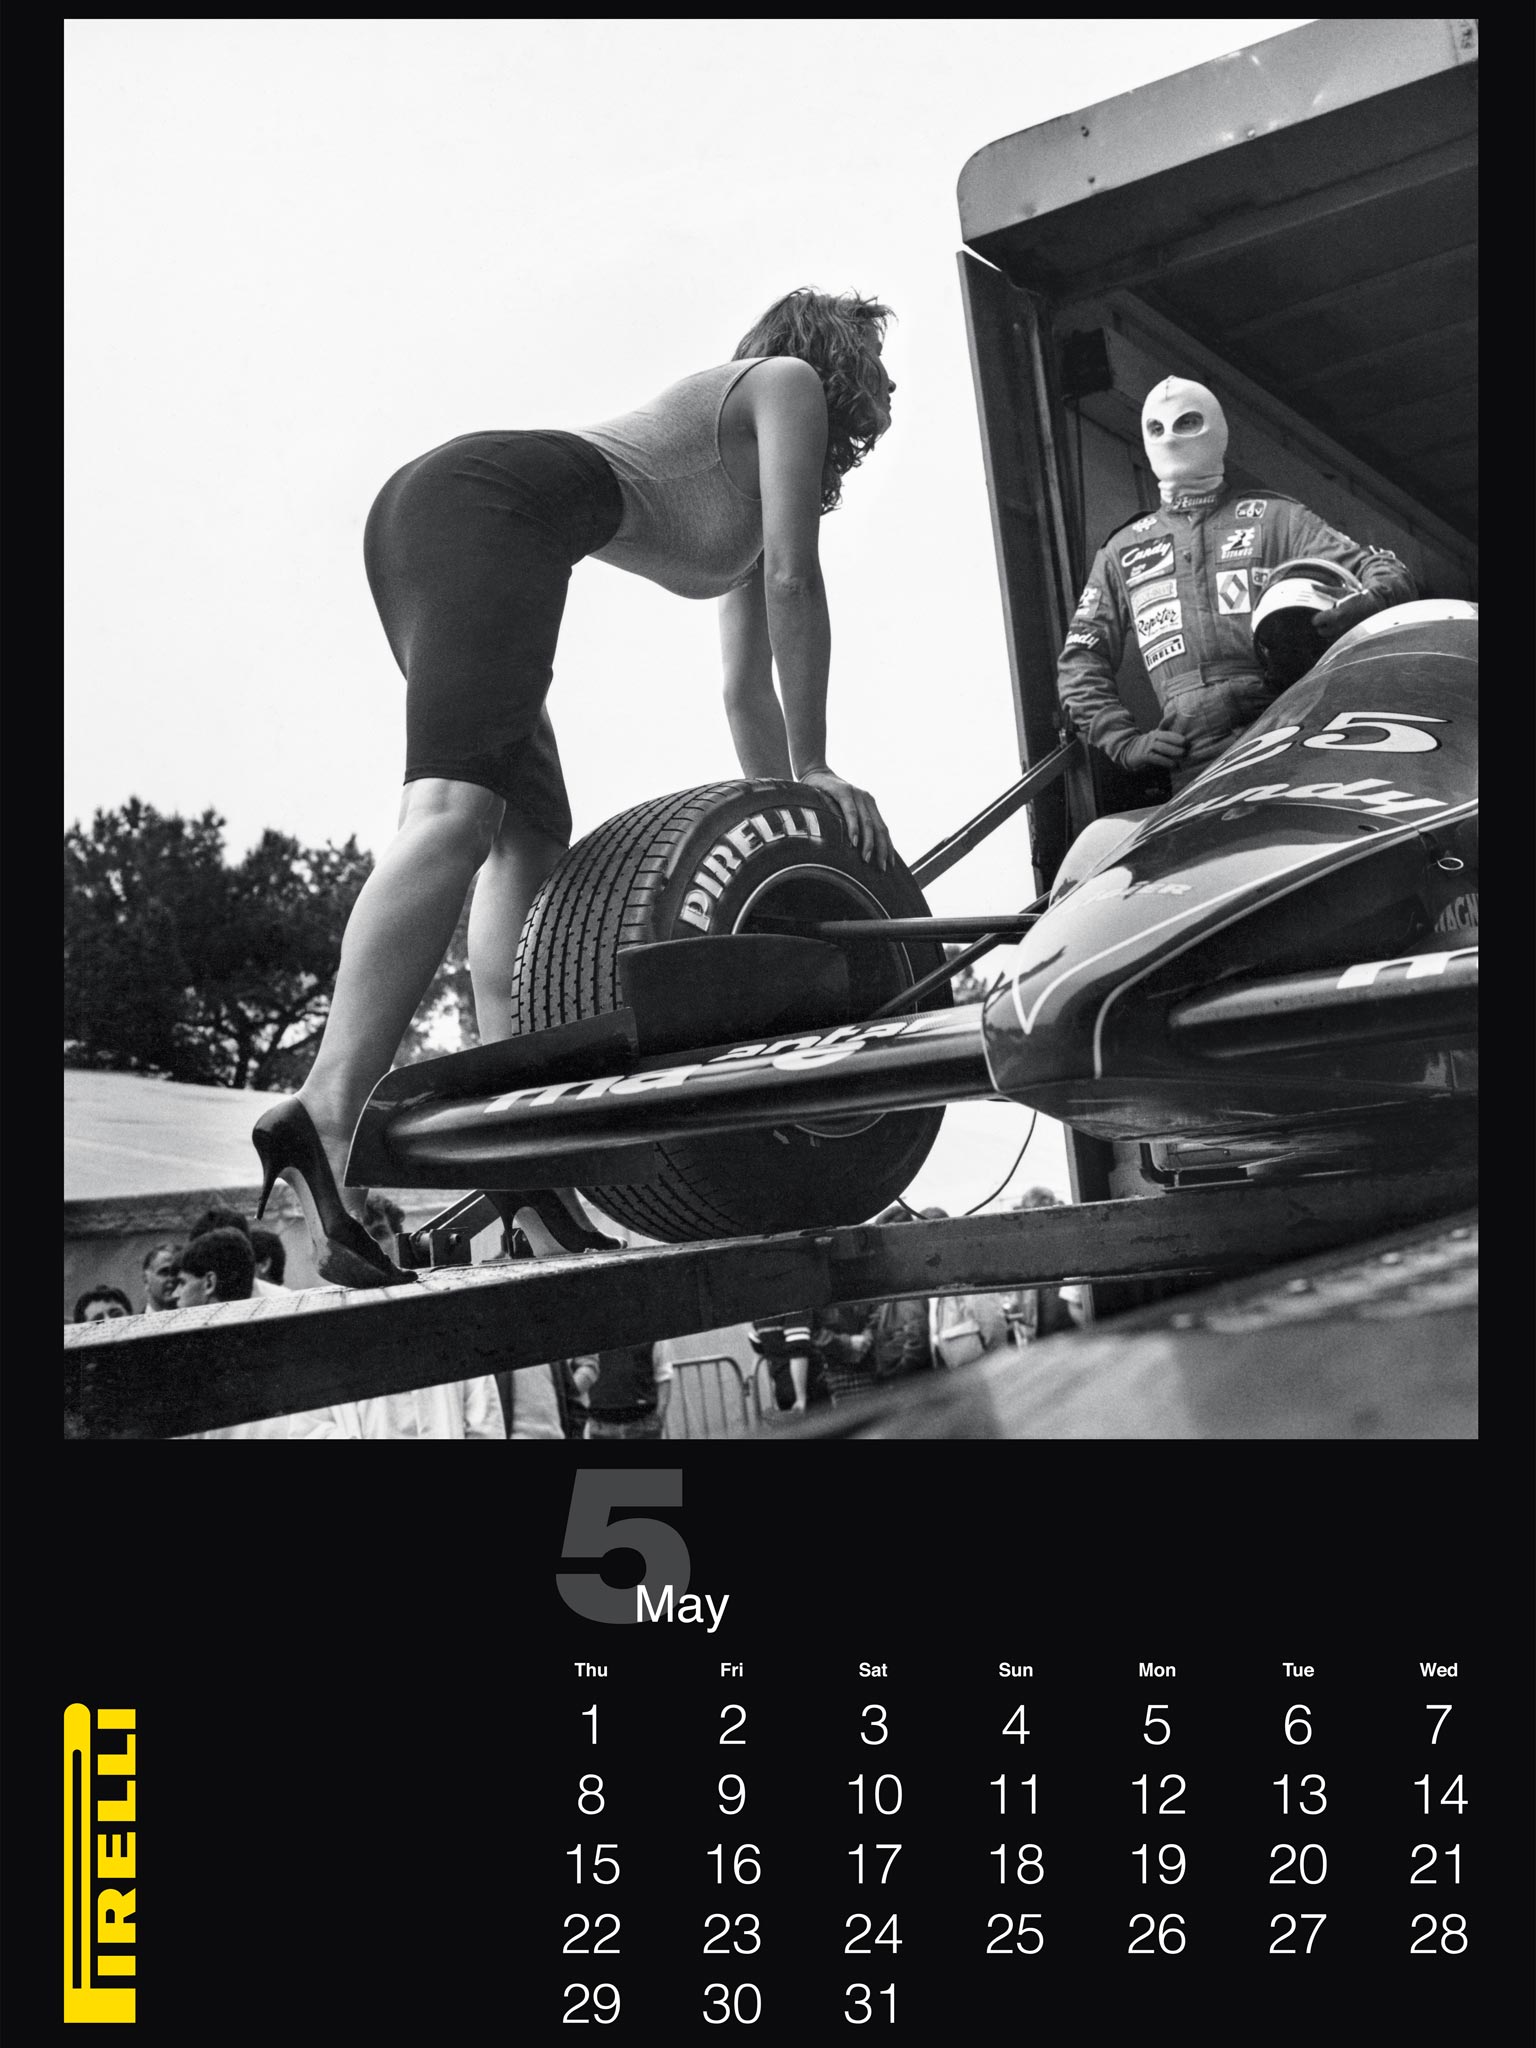 The Infamously Risqué Pirelli Calendar Reaches 50 Has It Moved With